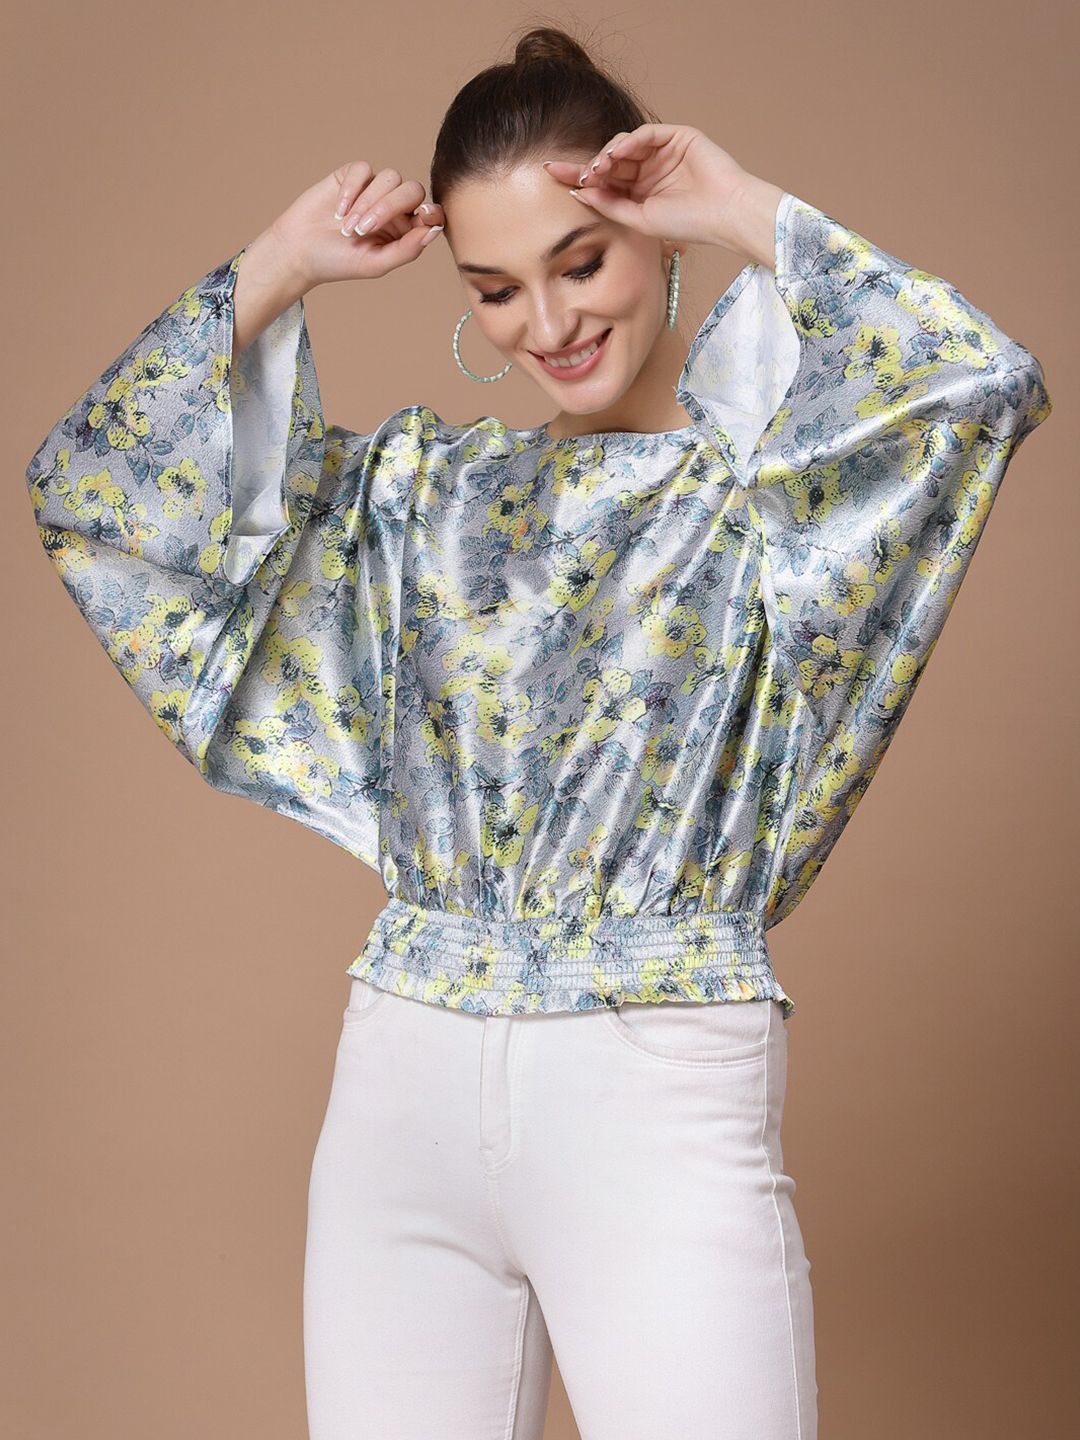 KASSUALLY Grey & Yellow Floral Print Satin Cinched Waist Top Price in India